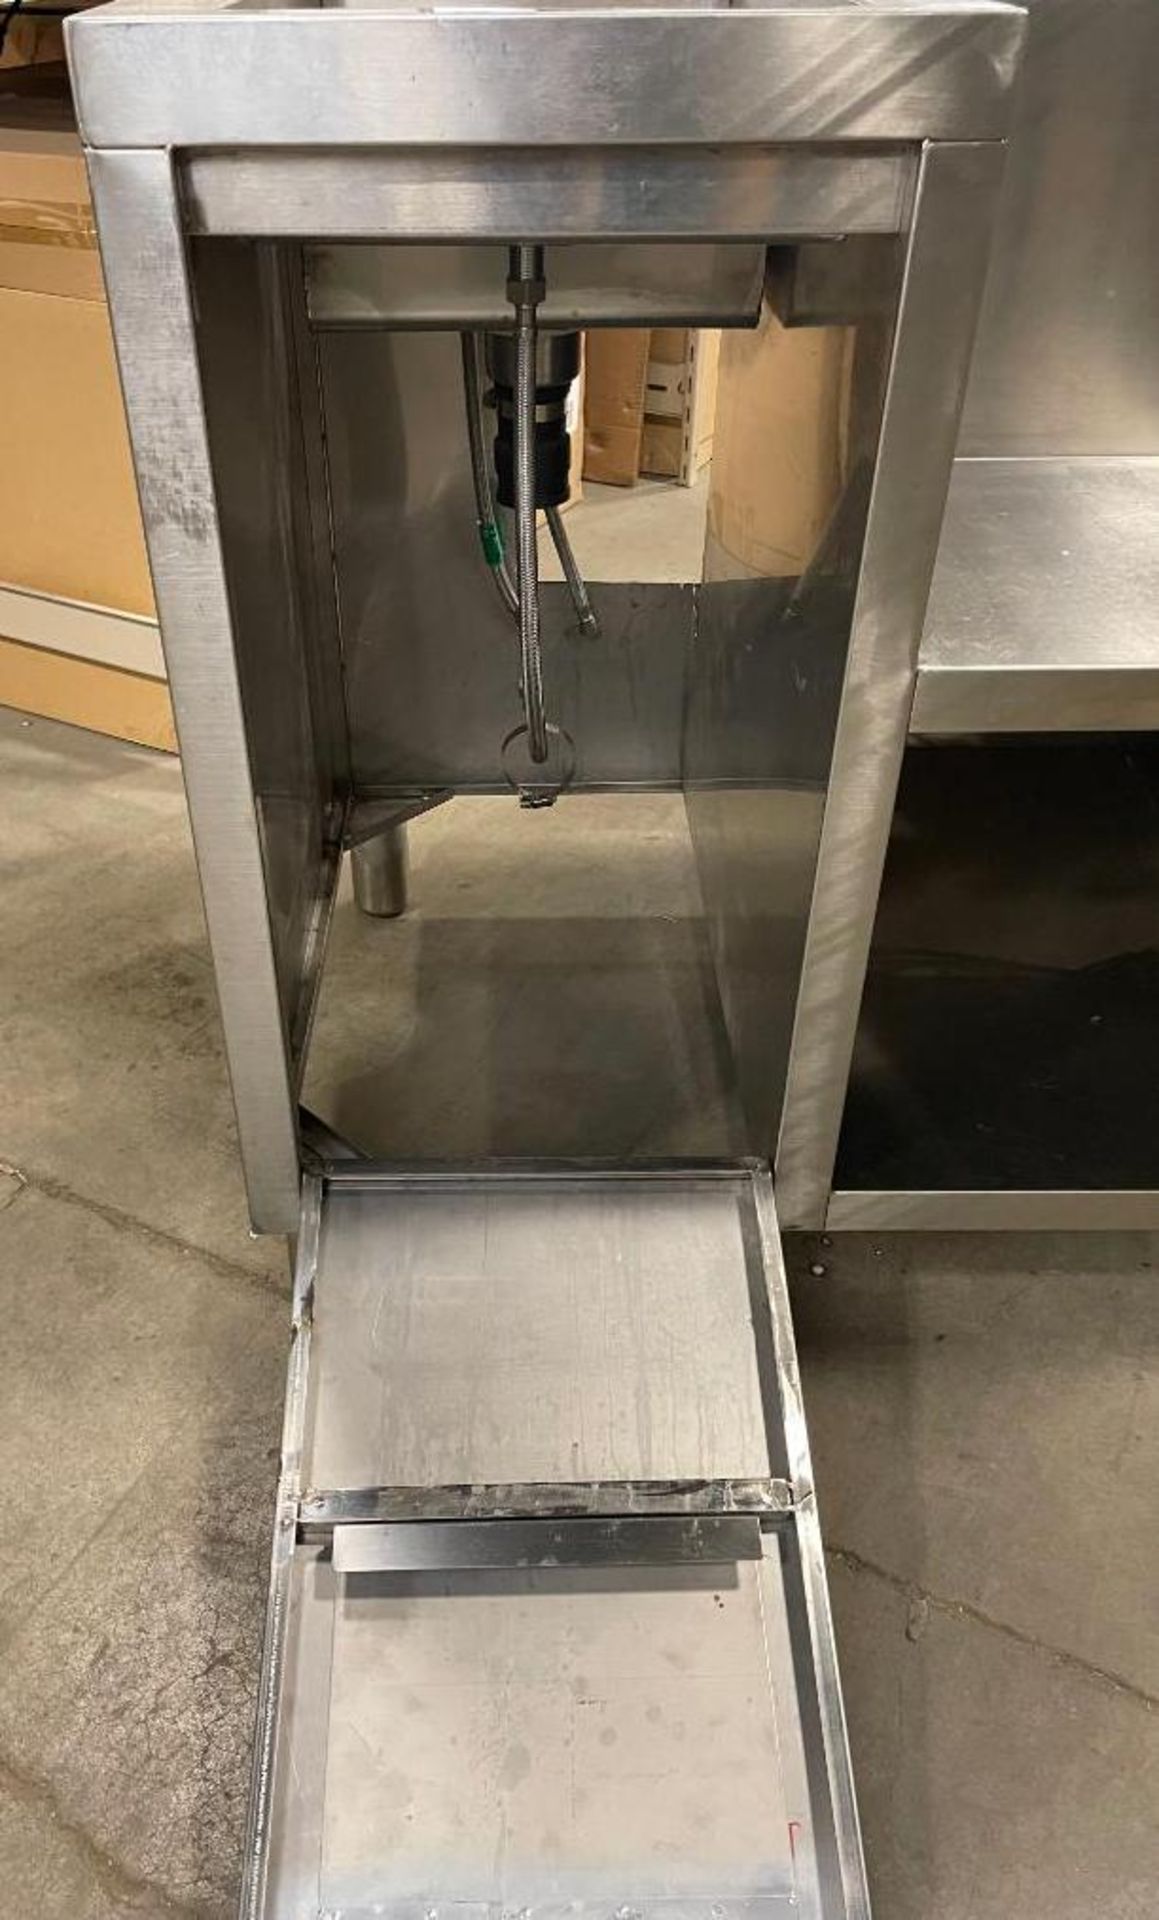 STAINLESS STEEL BEVERAGE TABLE WITH SINK, GLASS WASHER AND CUTTING BOARD - Image 11 of 14